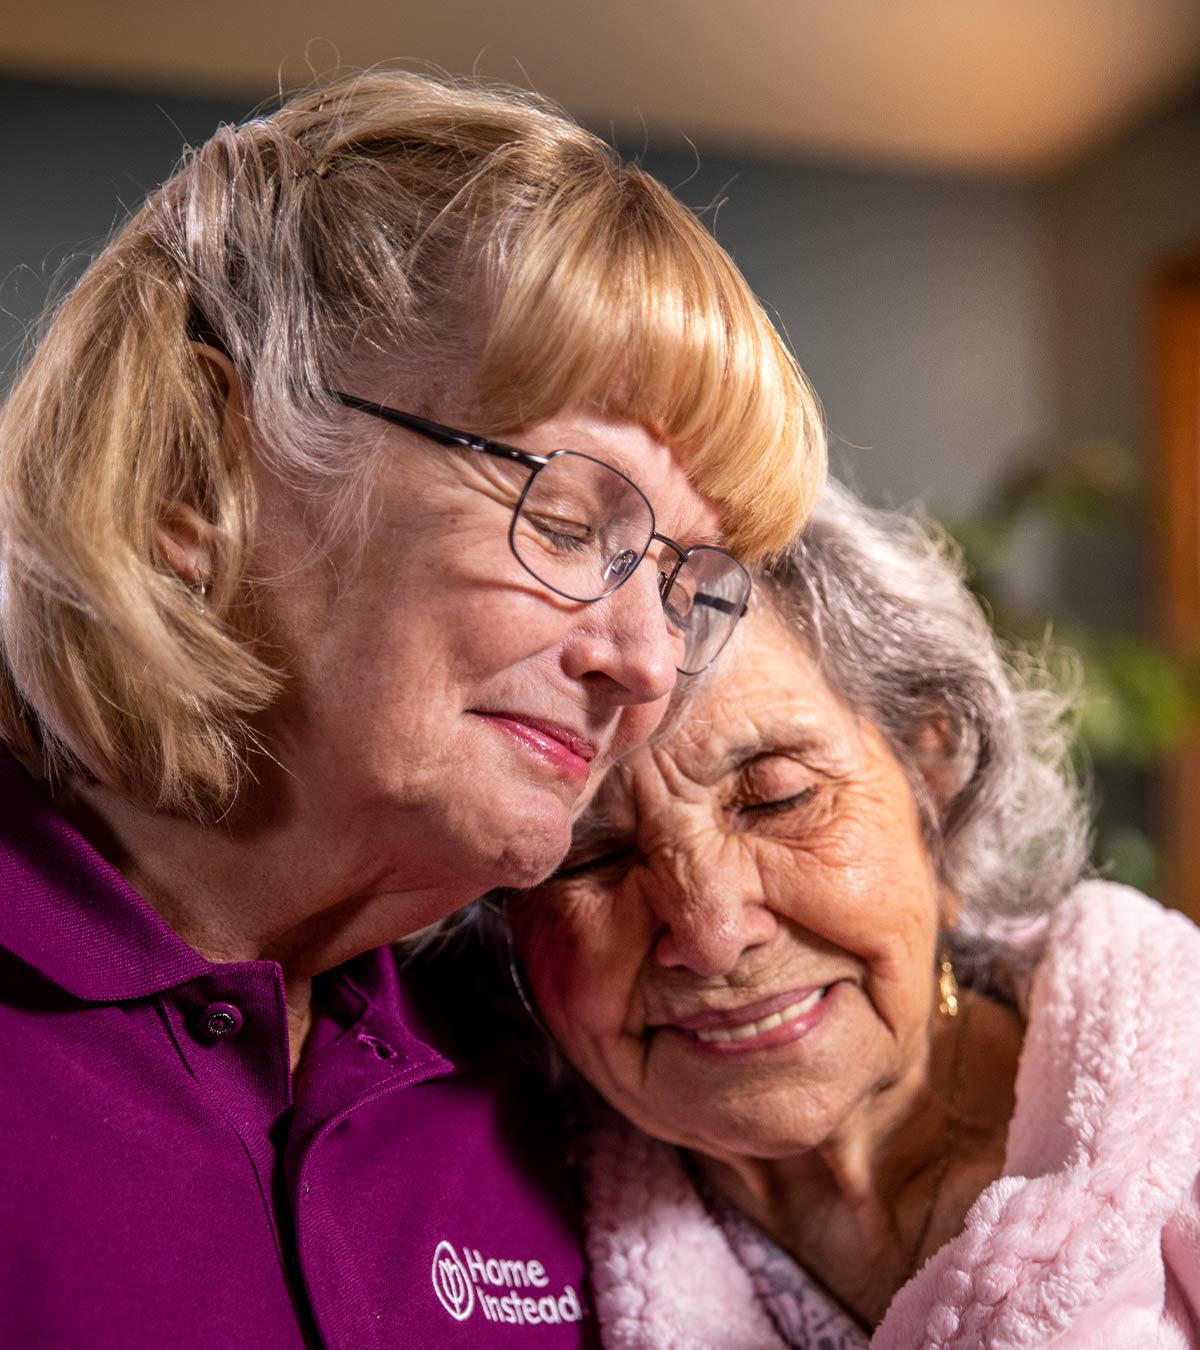 CAREGiver providing in-home senior care services. Home Instead of Chattanooga, TN provides Elder Care to aging adults. 